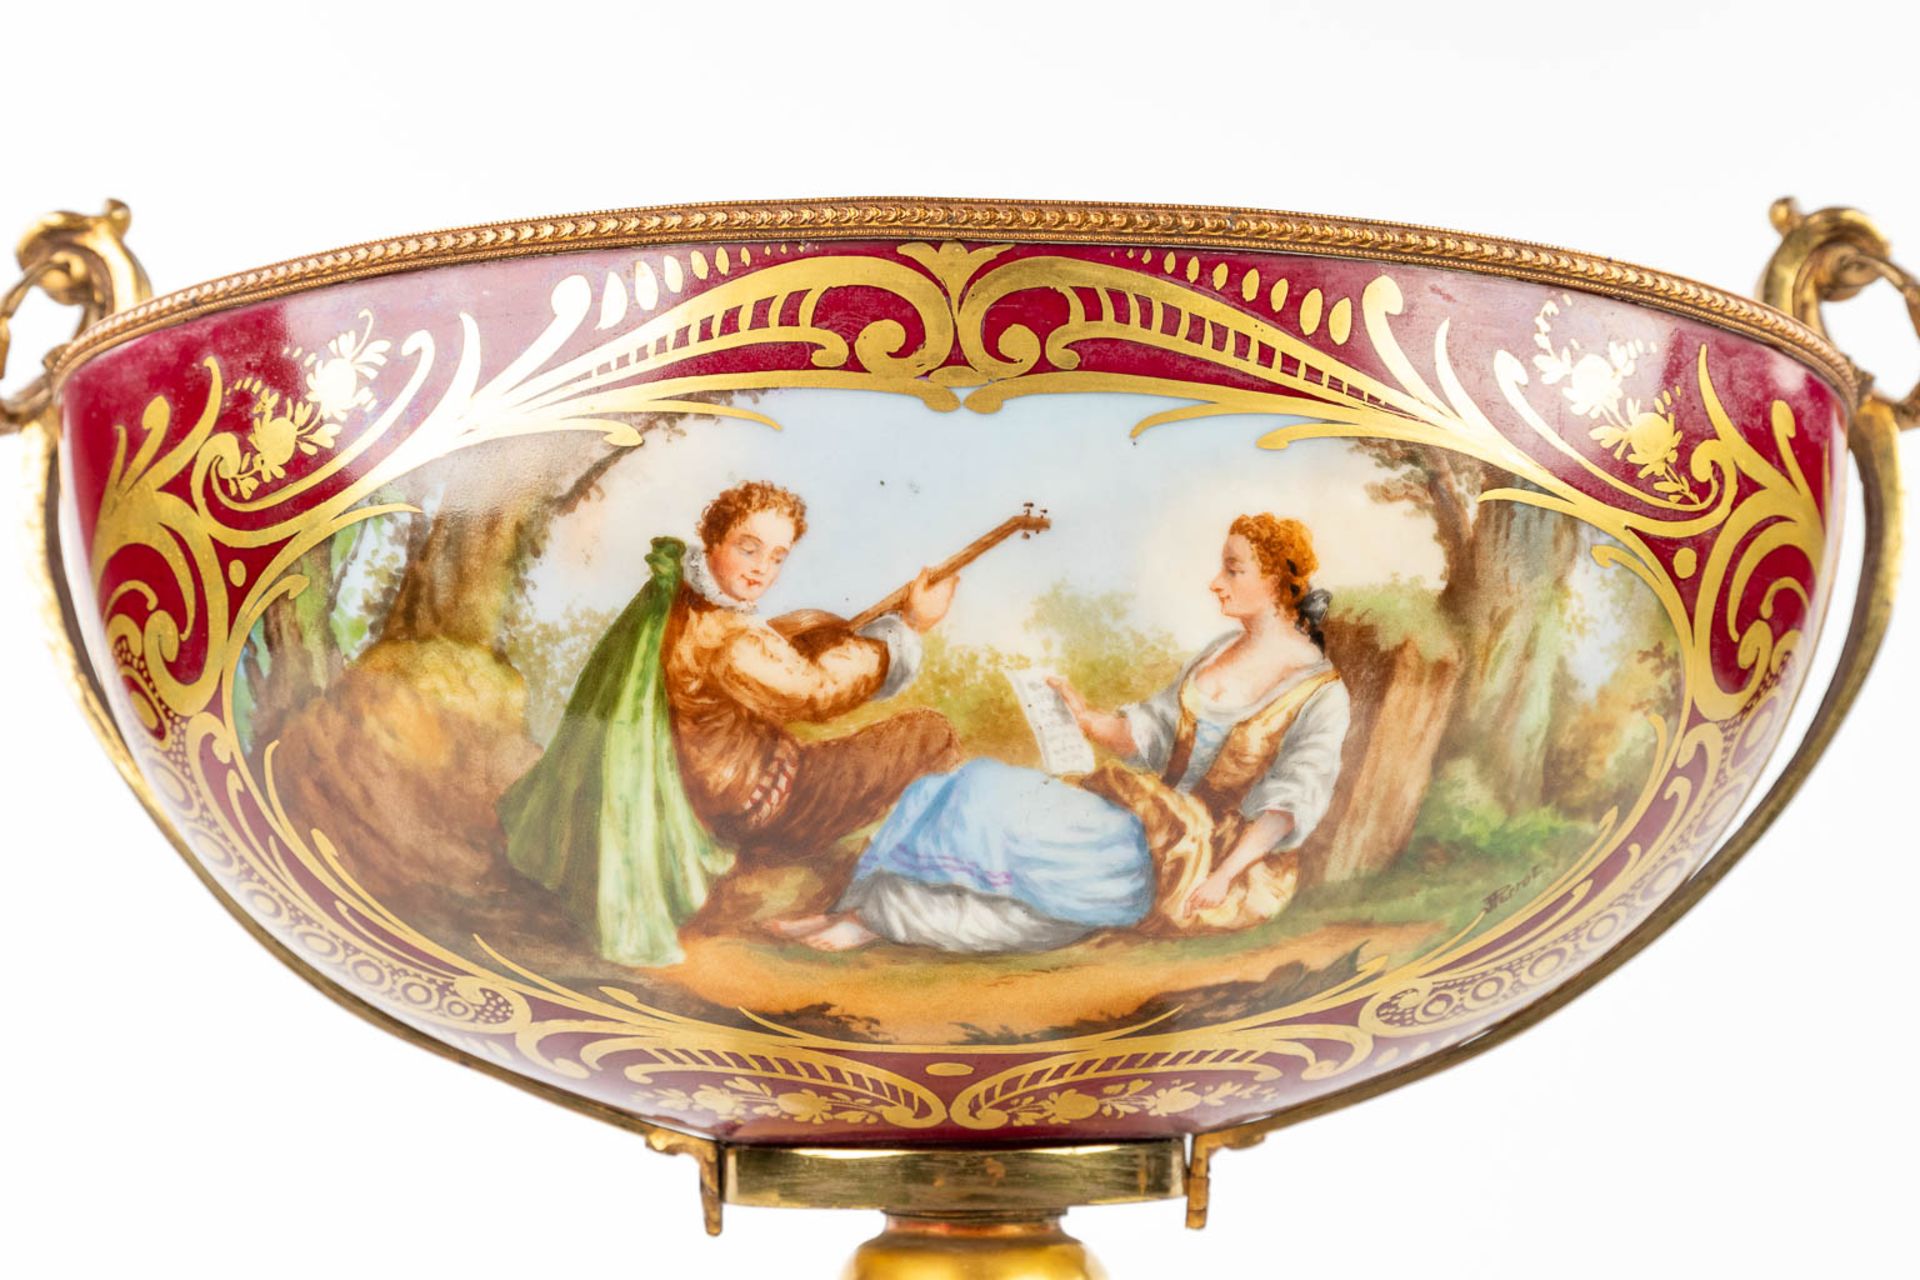 Limoges, a large bowl on a stand, with hand-painted decor. (L:20 x W:37 x H:31 cm) - Image 9 of 16